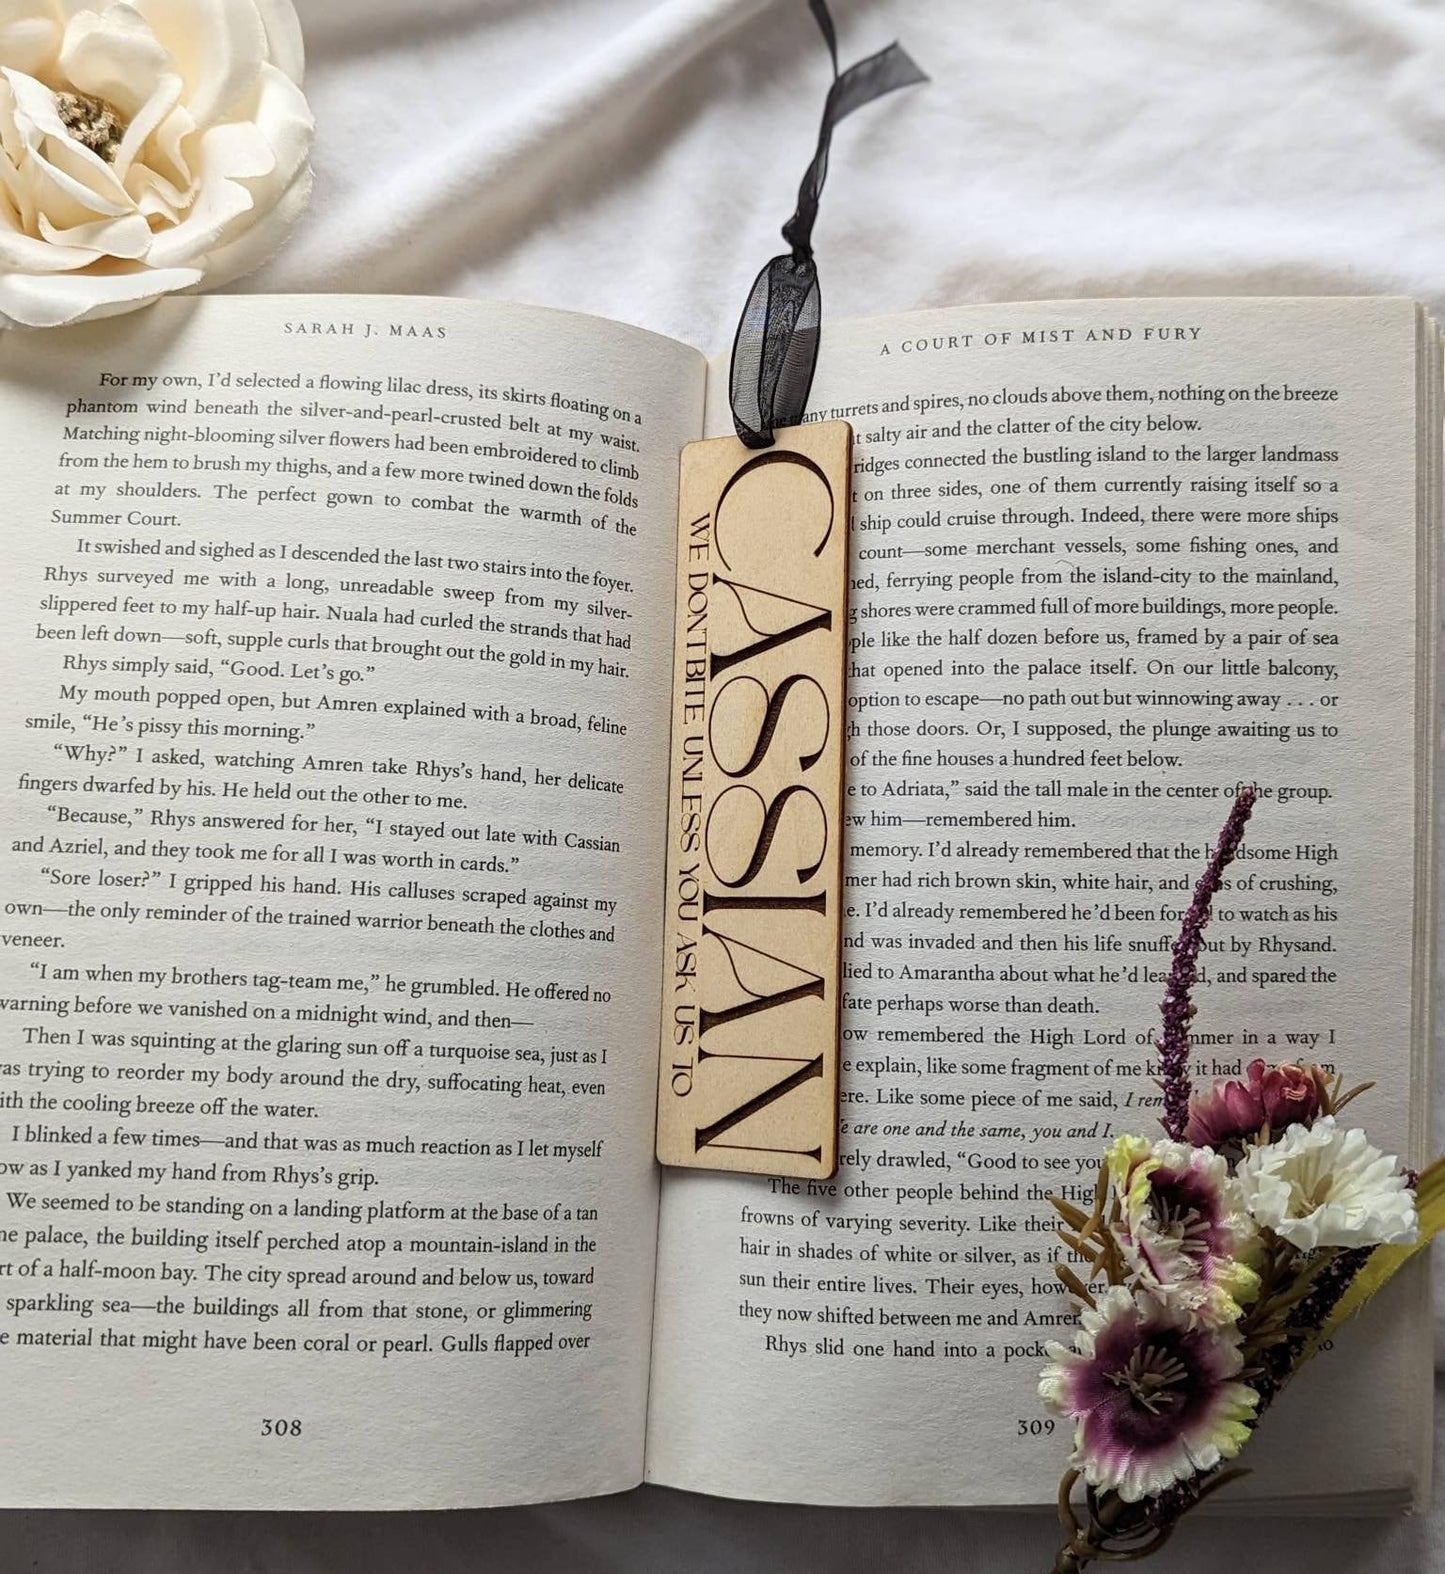 Cassian "We don't bite unless you ask us to" | Licensed ACOTAR wooden bookmark - Quill & Cauldron